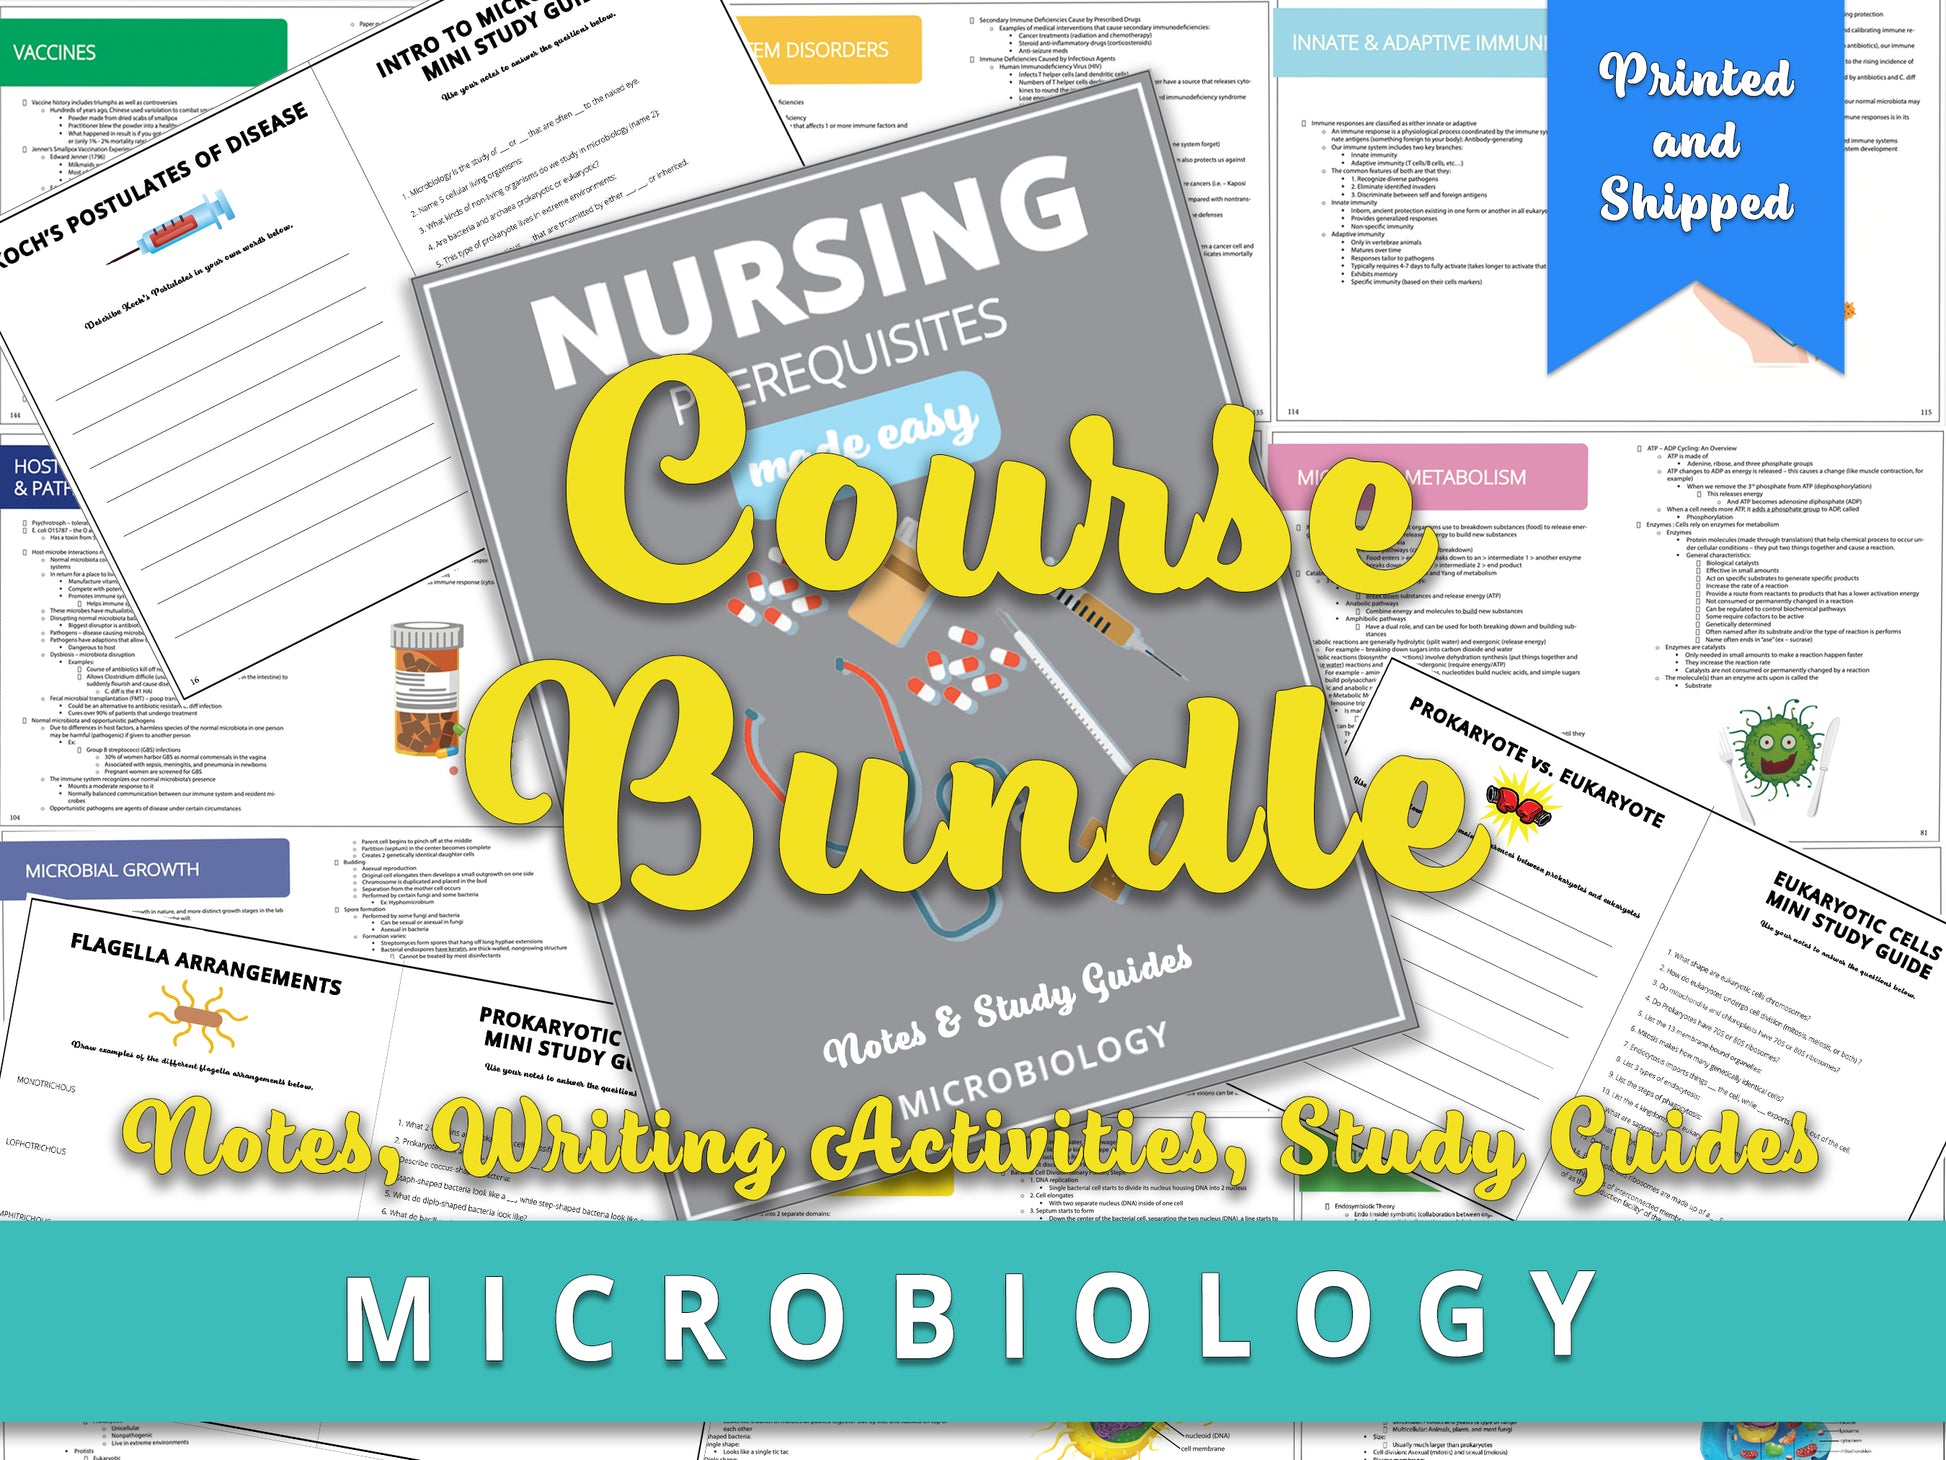 microbiology notes, microbiology study guide